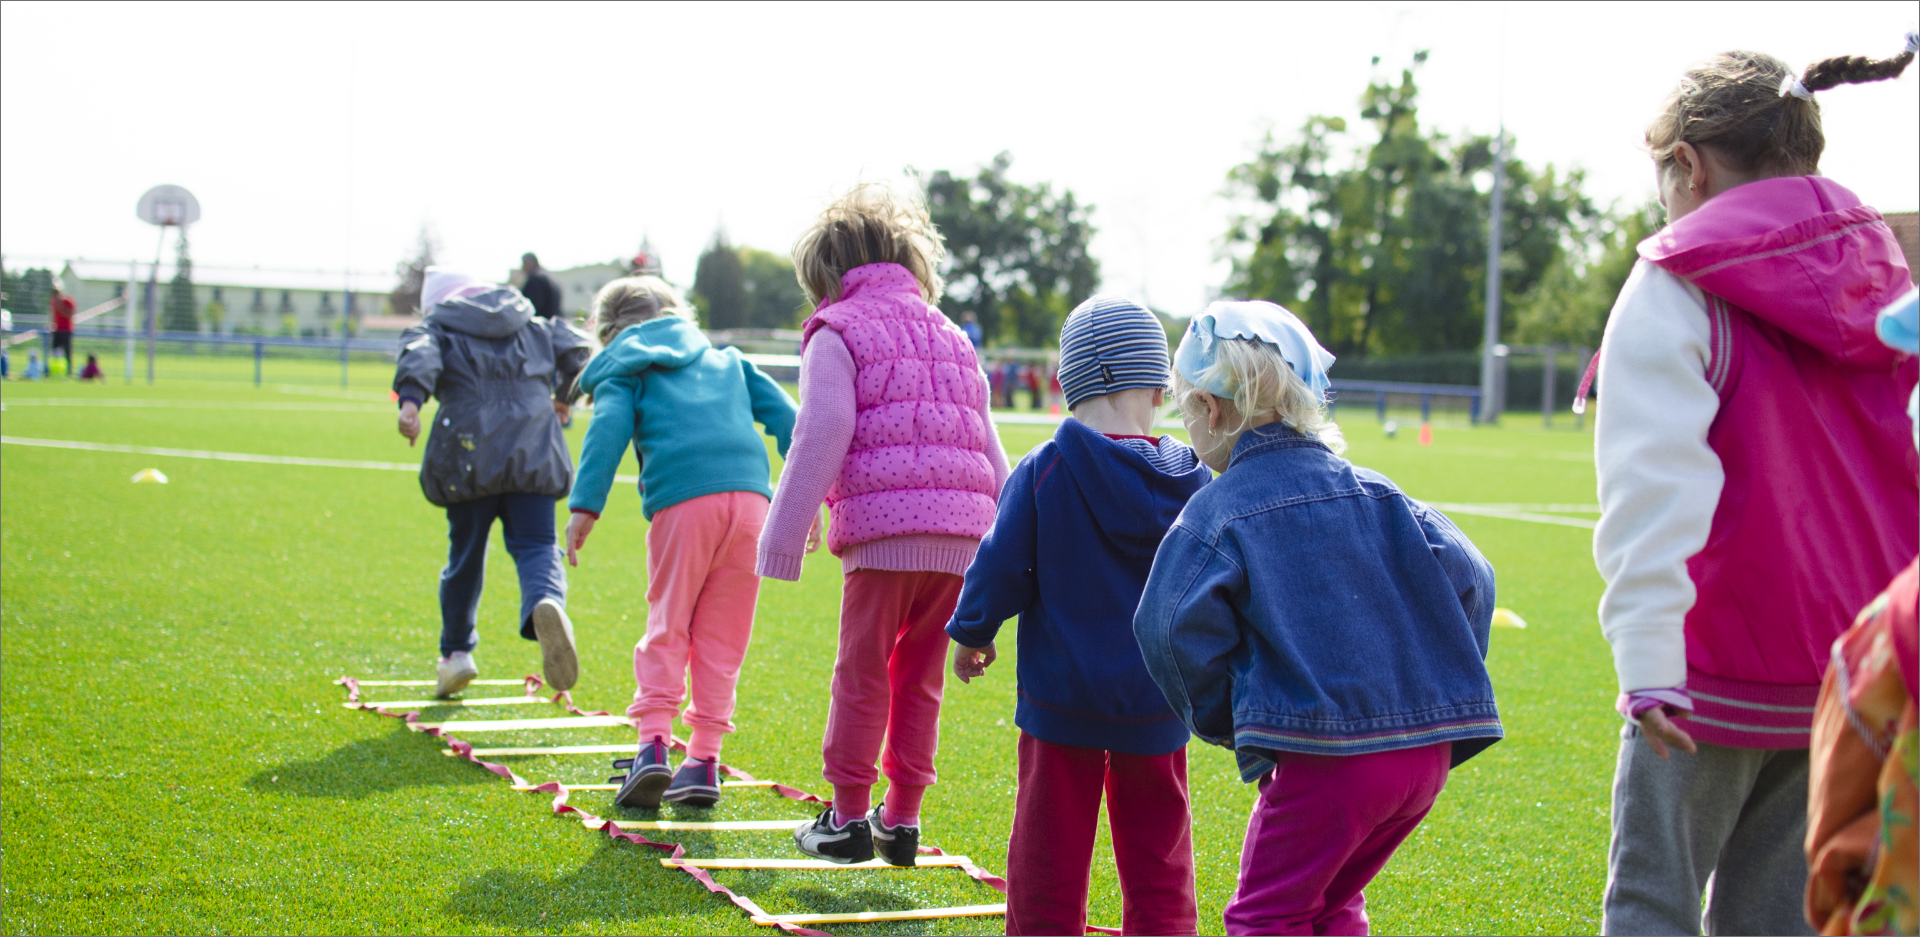 Image of children playing hopscotch outside on a field at school